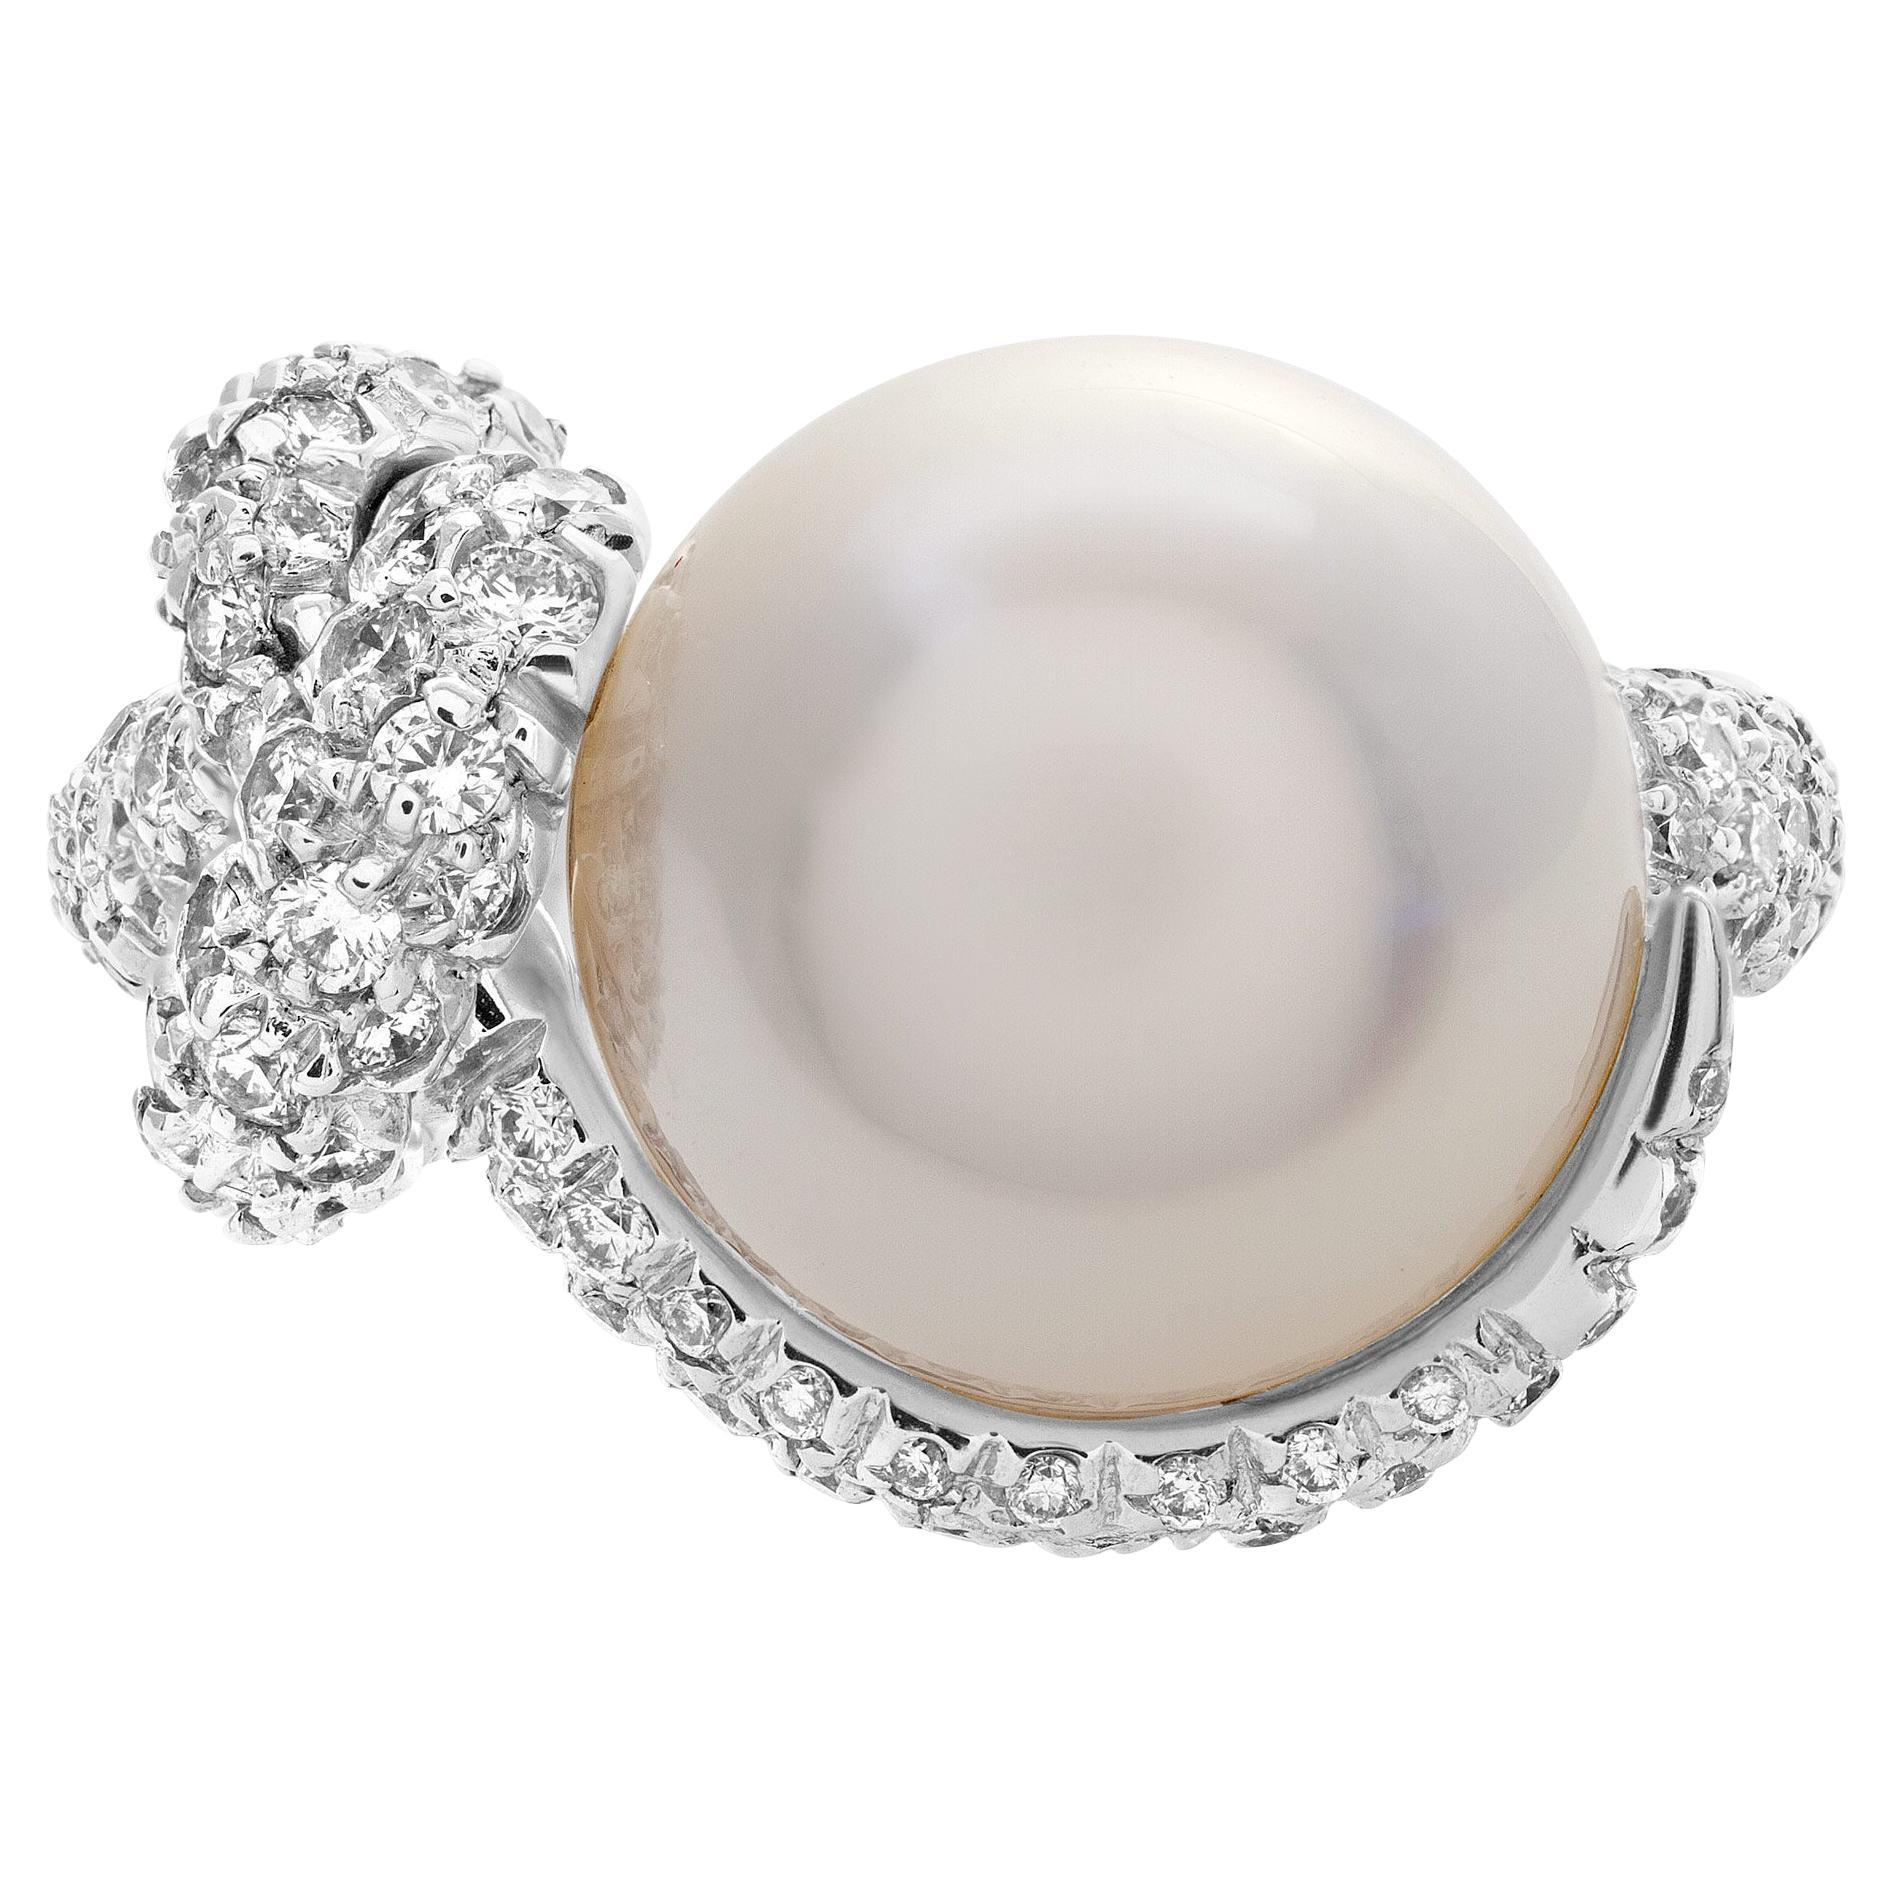 Mikimoto Milano South Sea Cultured Pearl Ring with High Grade, Excellent Luster